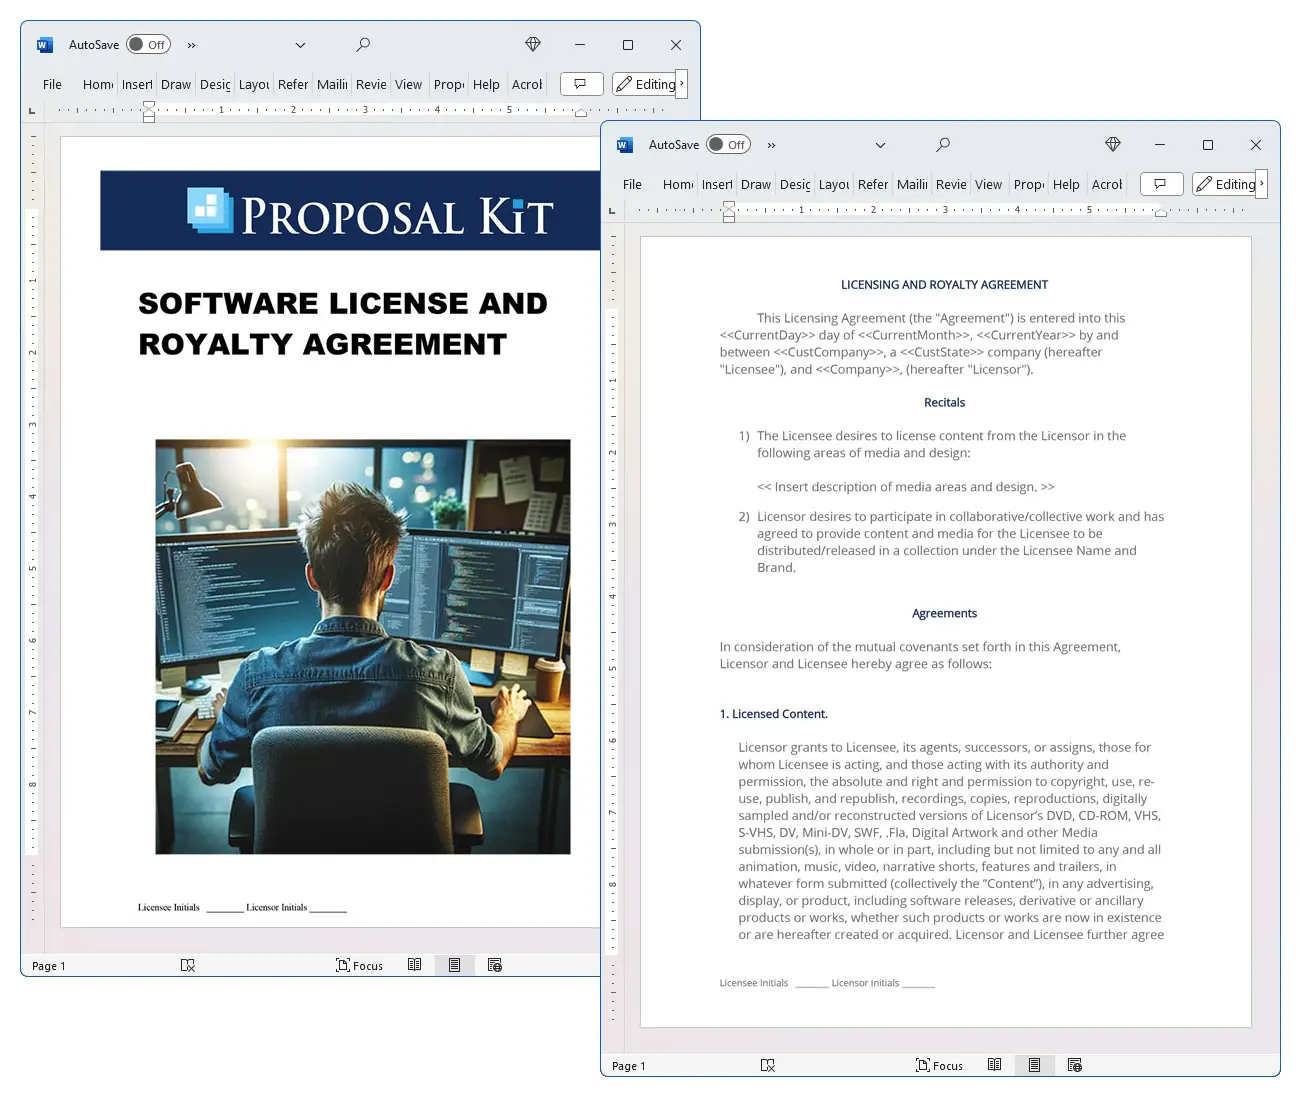 Software License and Royalty Agreement Concepts